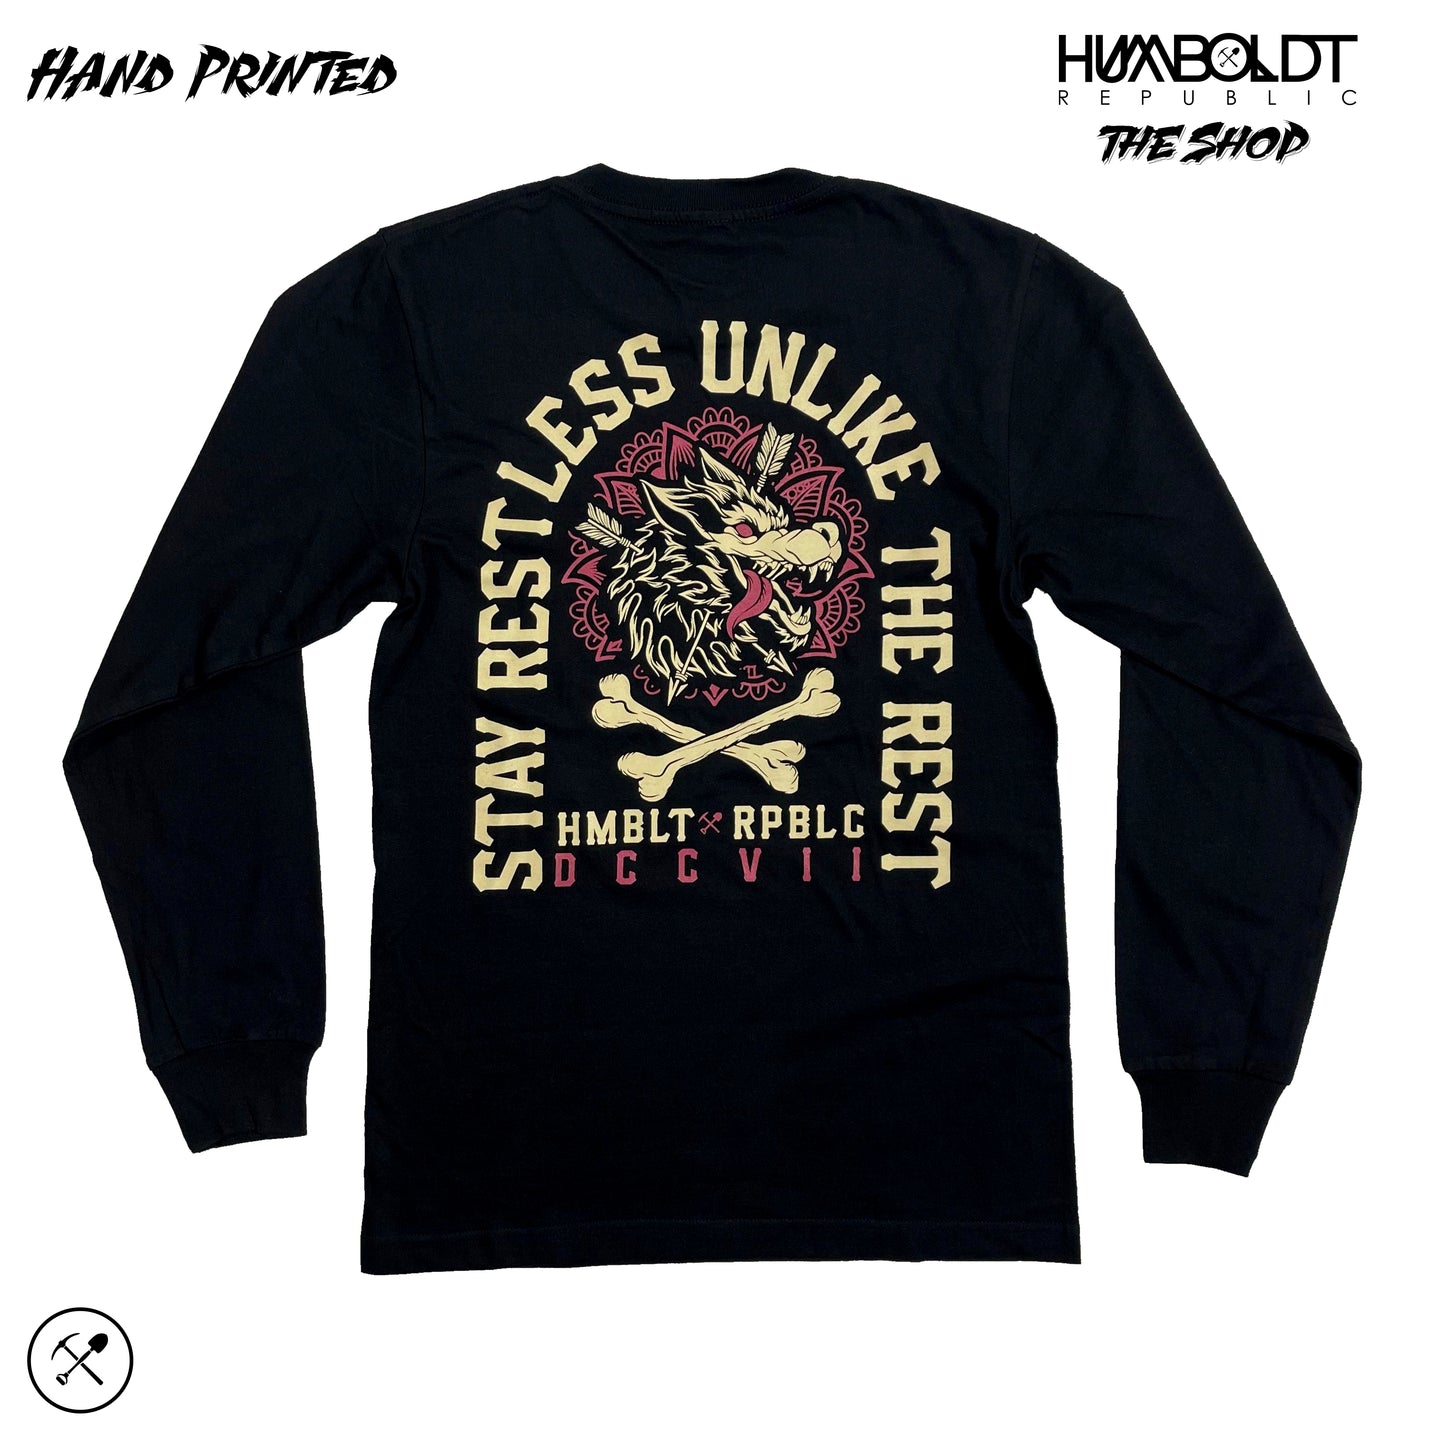 "Stay Restless" Mens's Long Sleeve